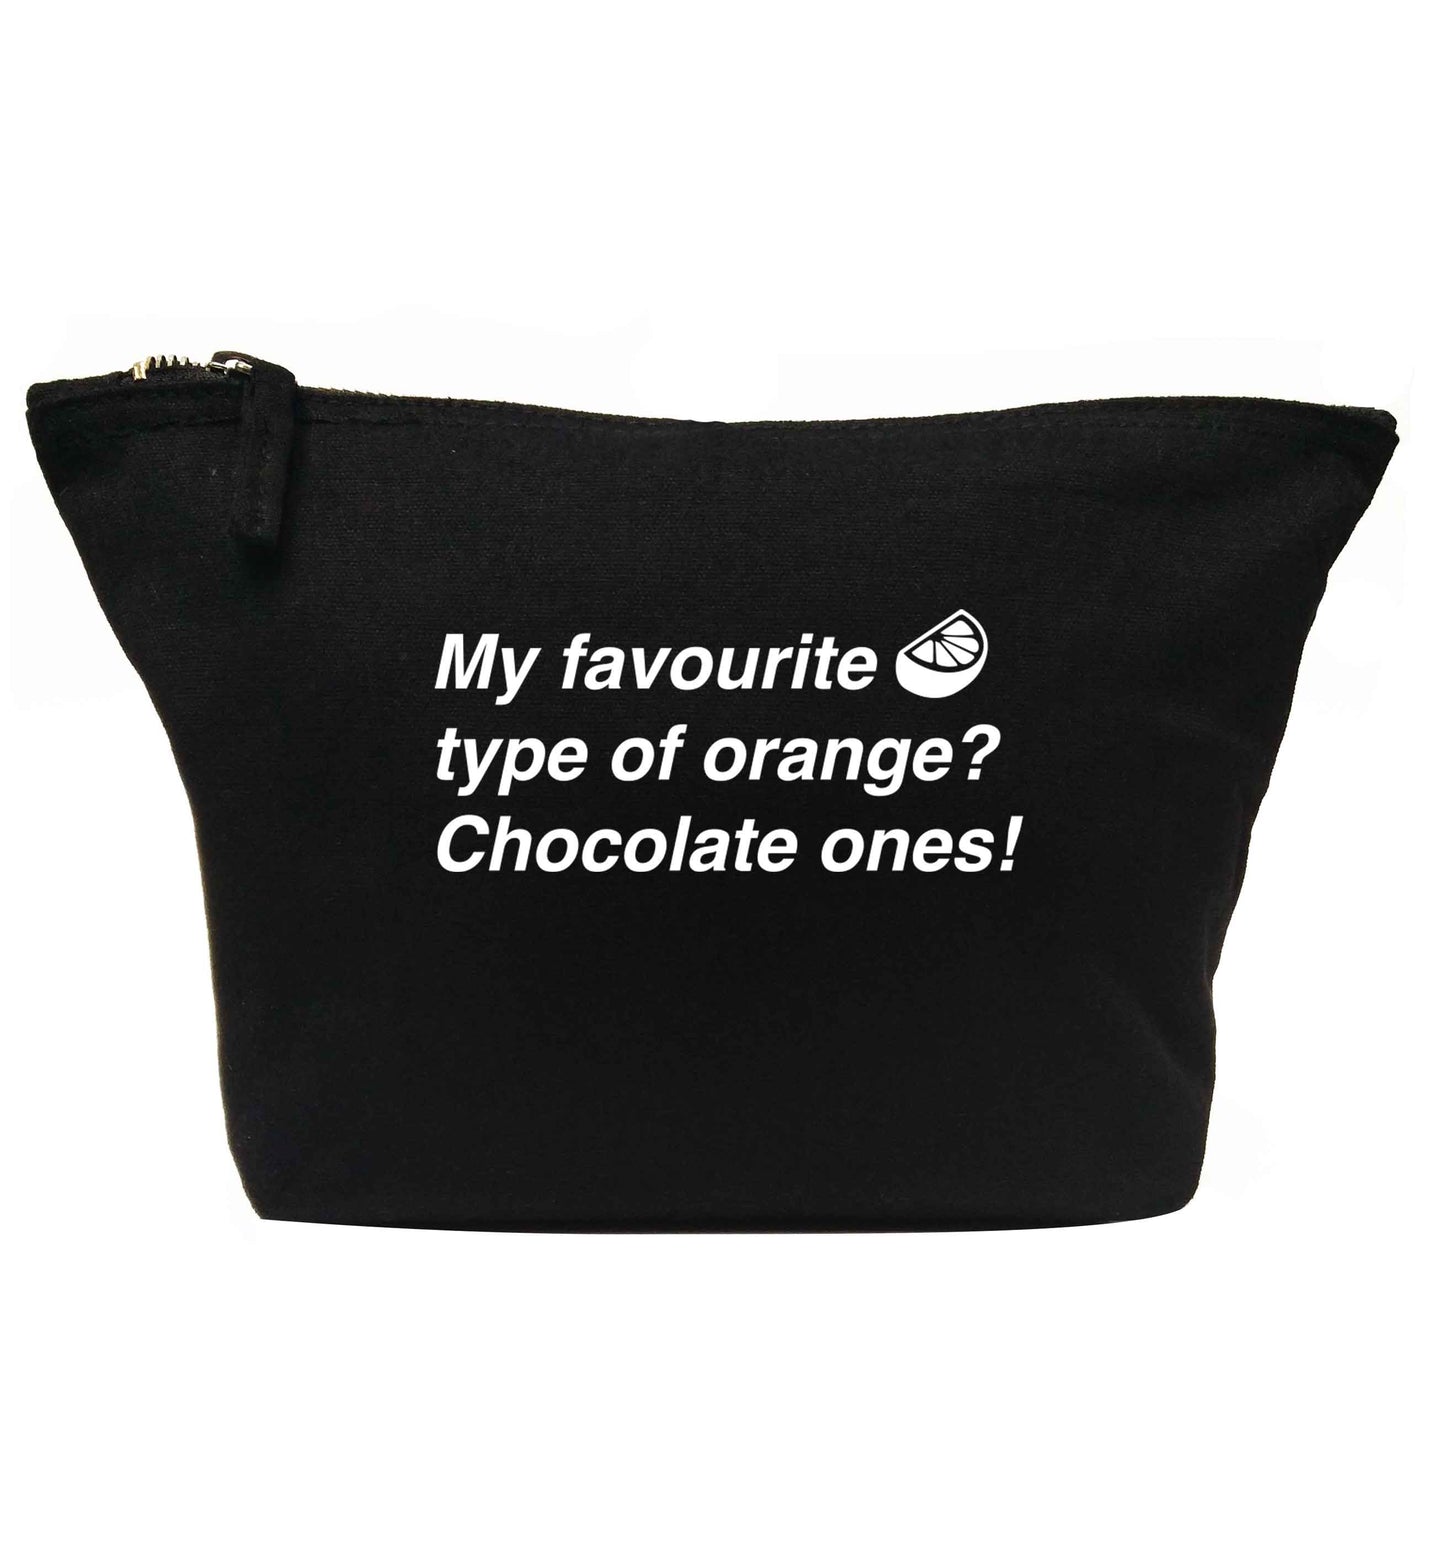 My favourite kind of oranges? Chocolate ones! | Makeup / wash bag